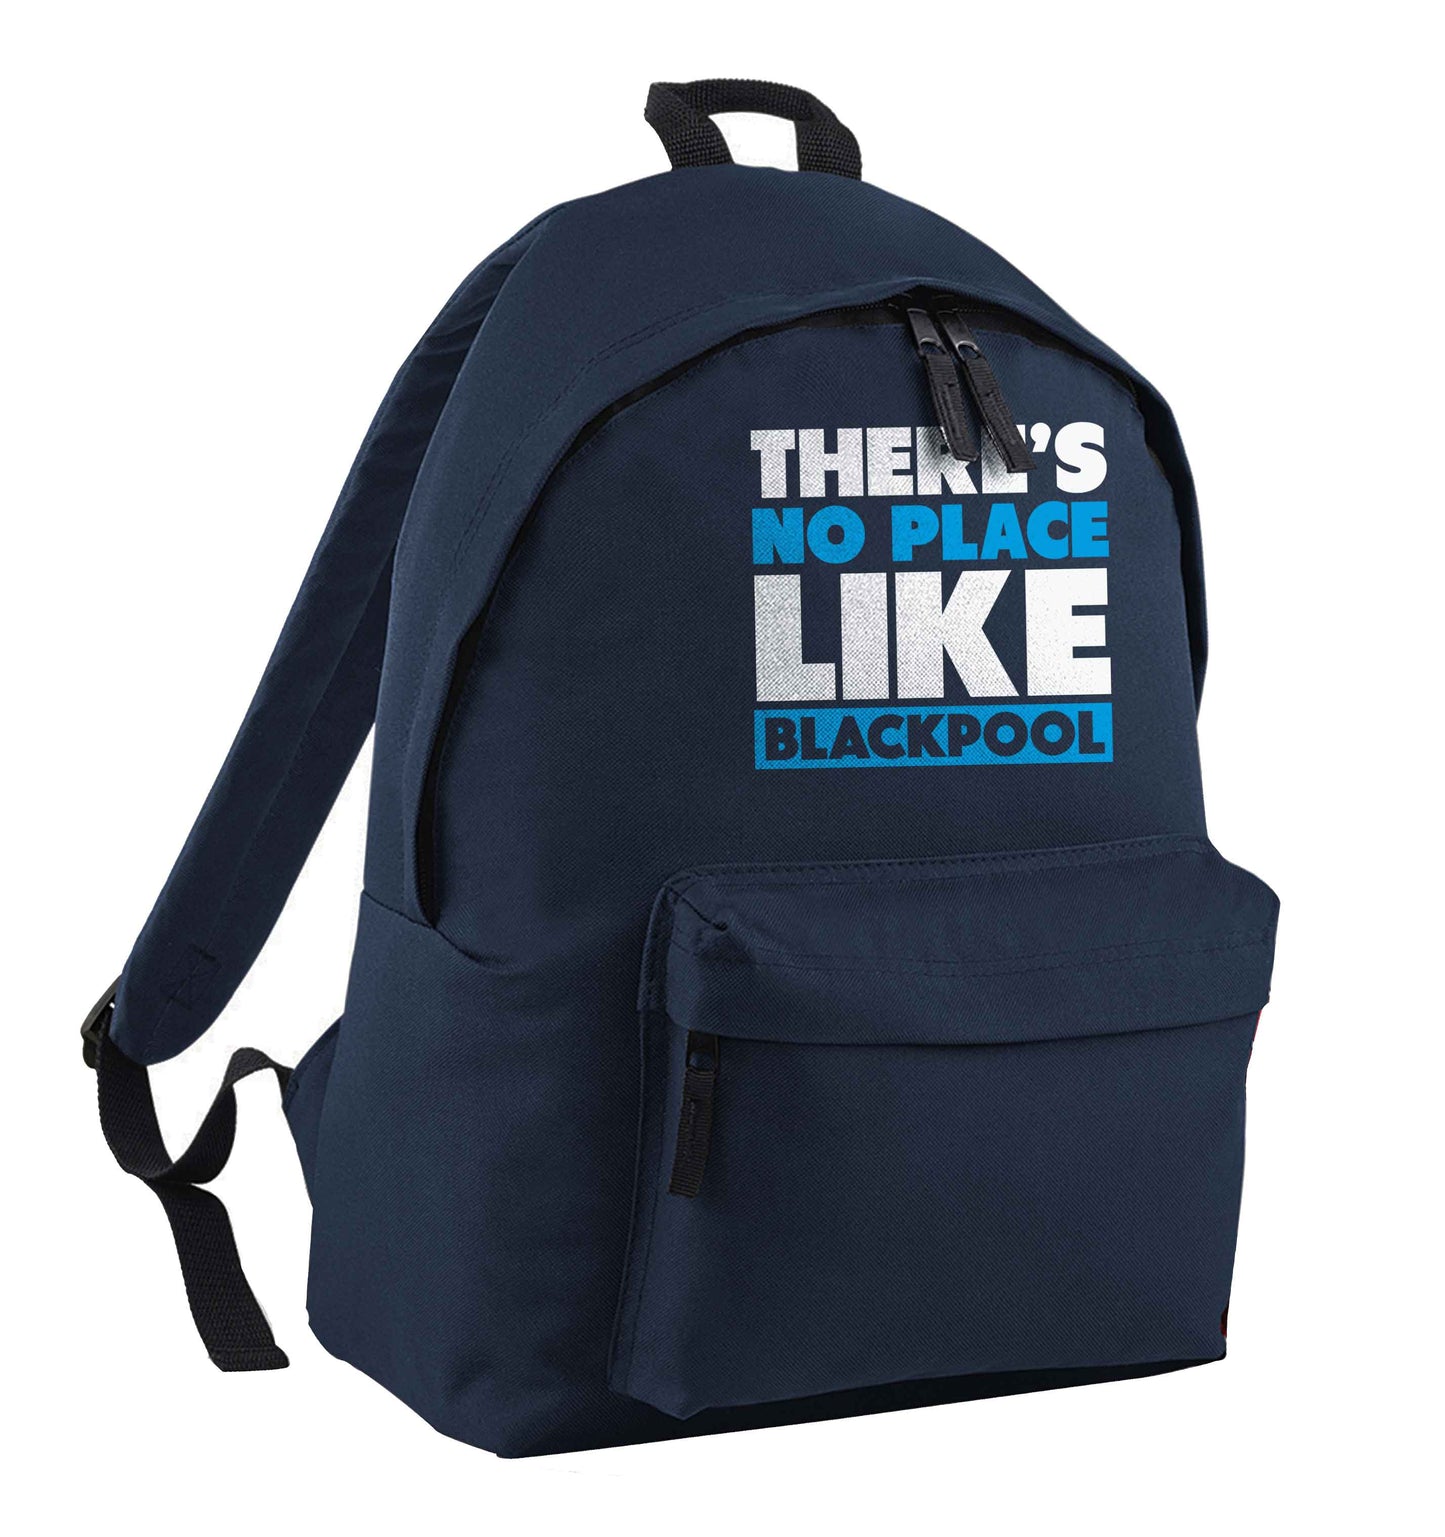 There's no place like Blackpool navy children's backpack